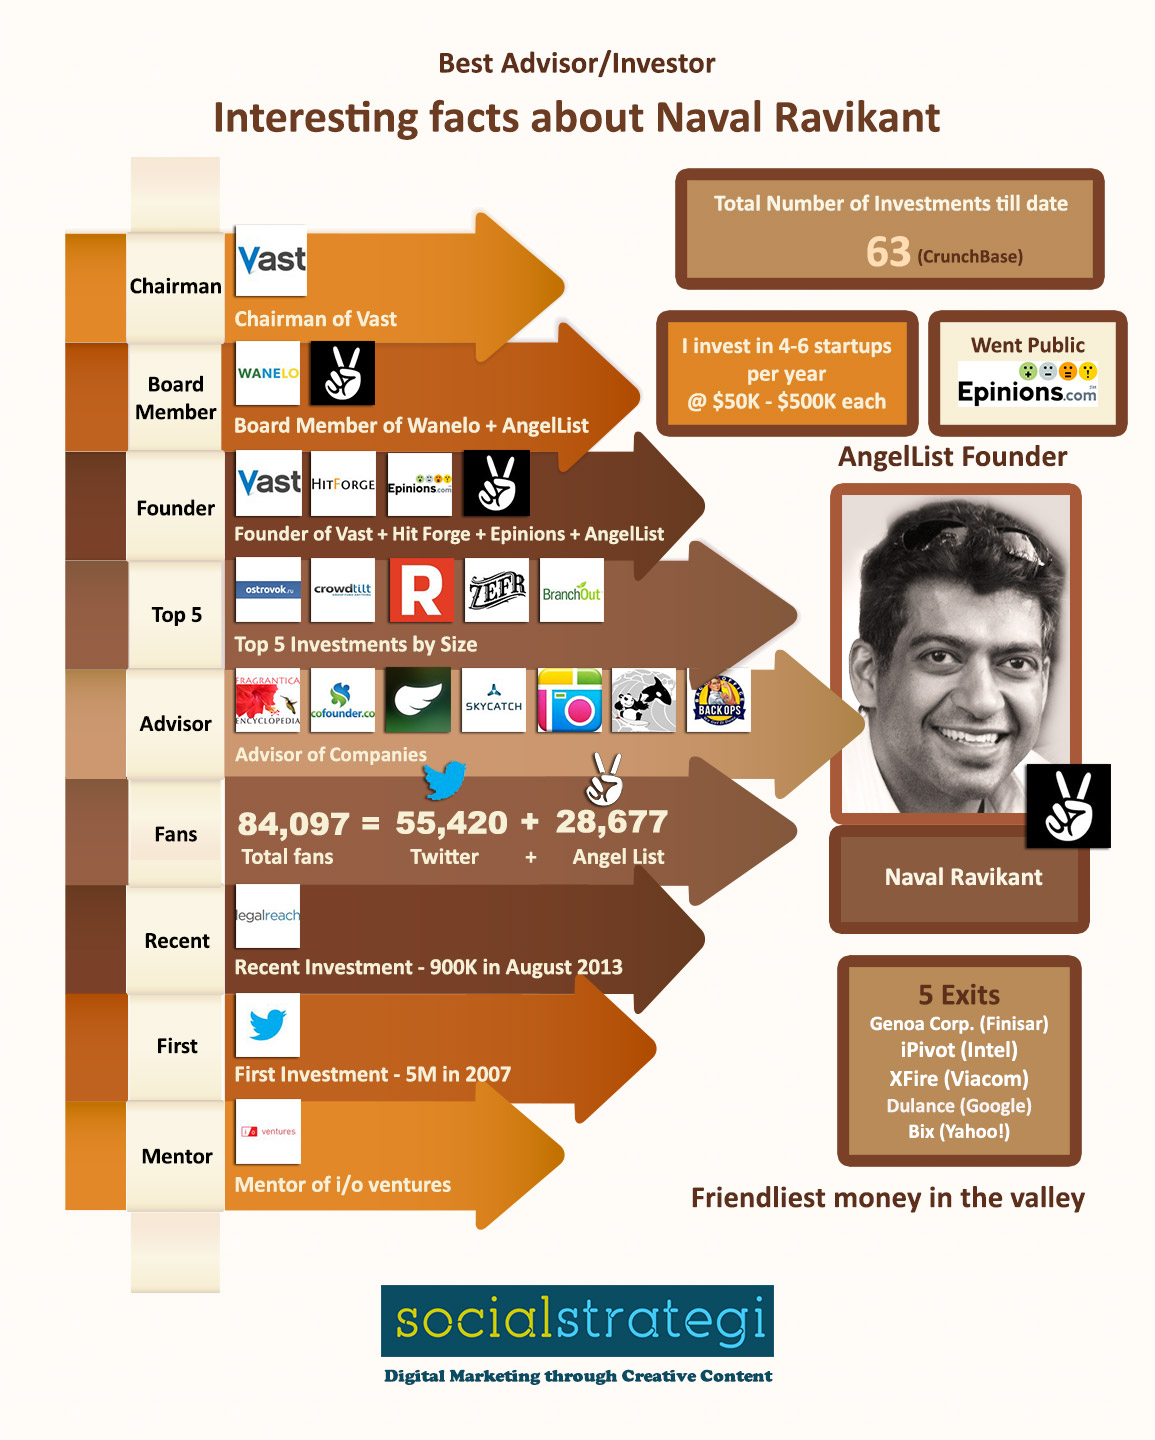 How Naval Ravikant Decides What to Invest in